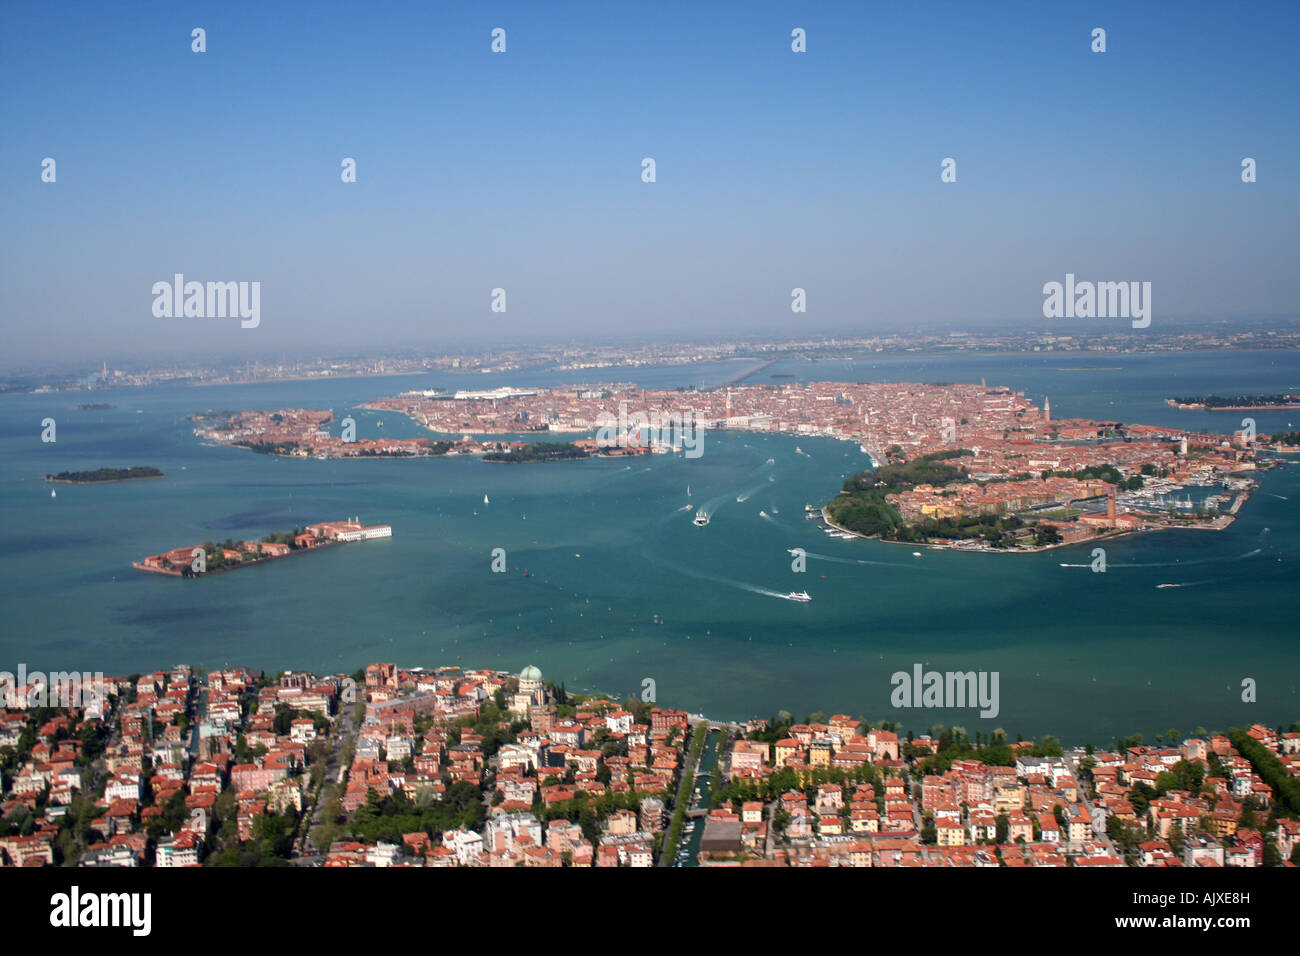 Venice Lido, the lagoon and the Italian city of Venice, seen from the air Stock Photo